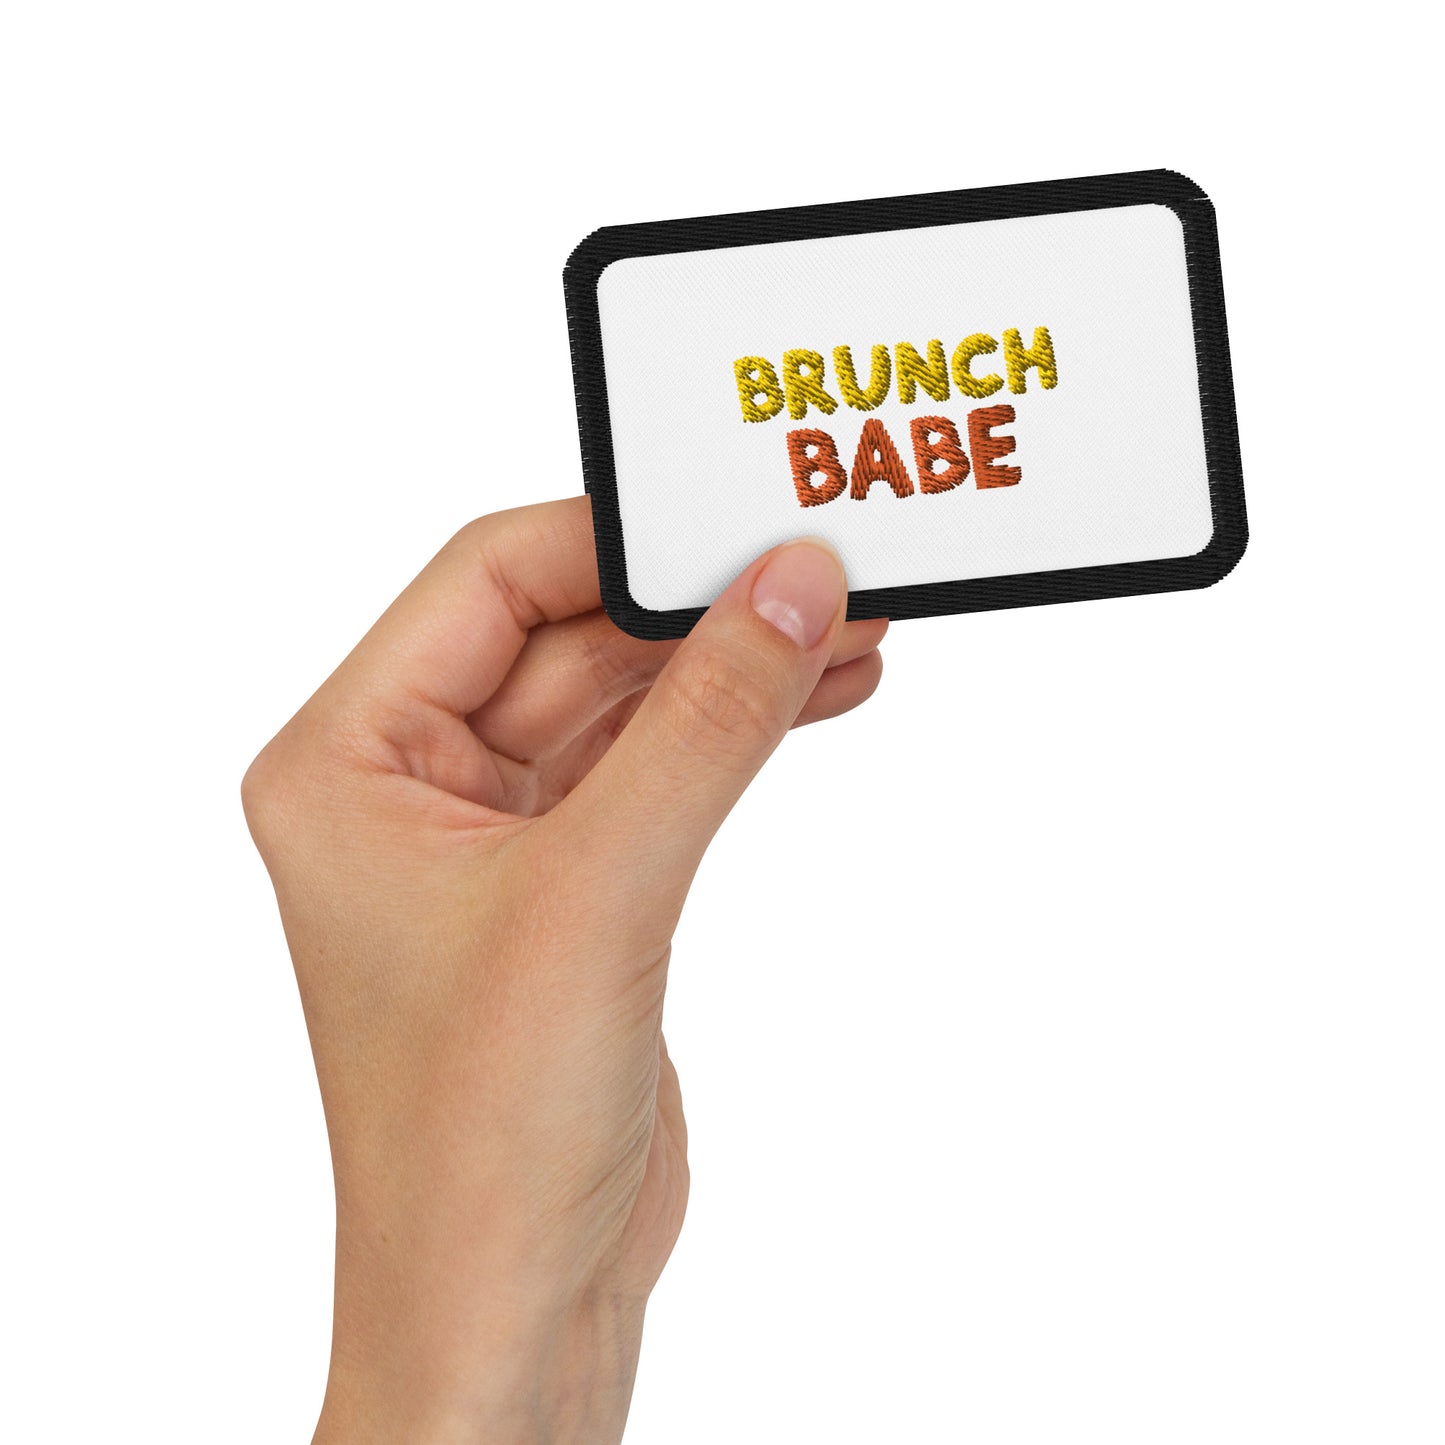 Brunch Babe Embroidered patches